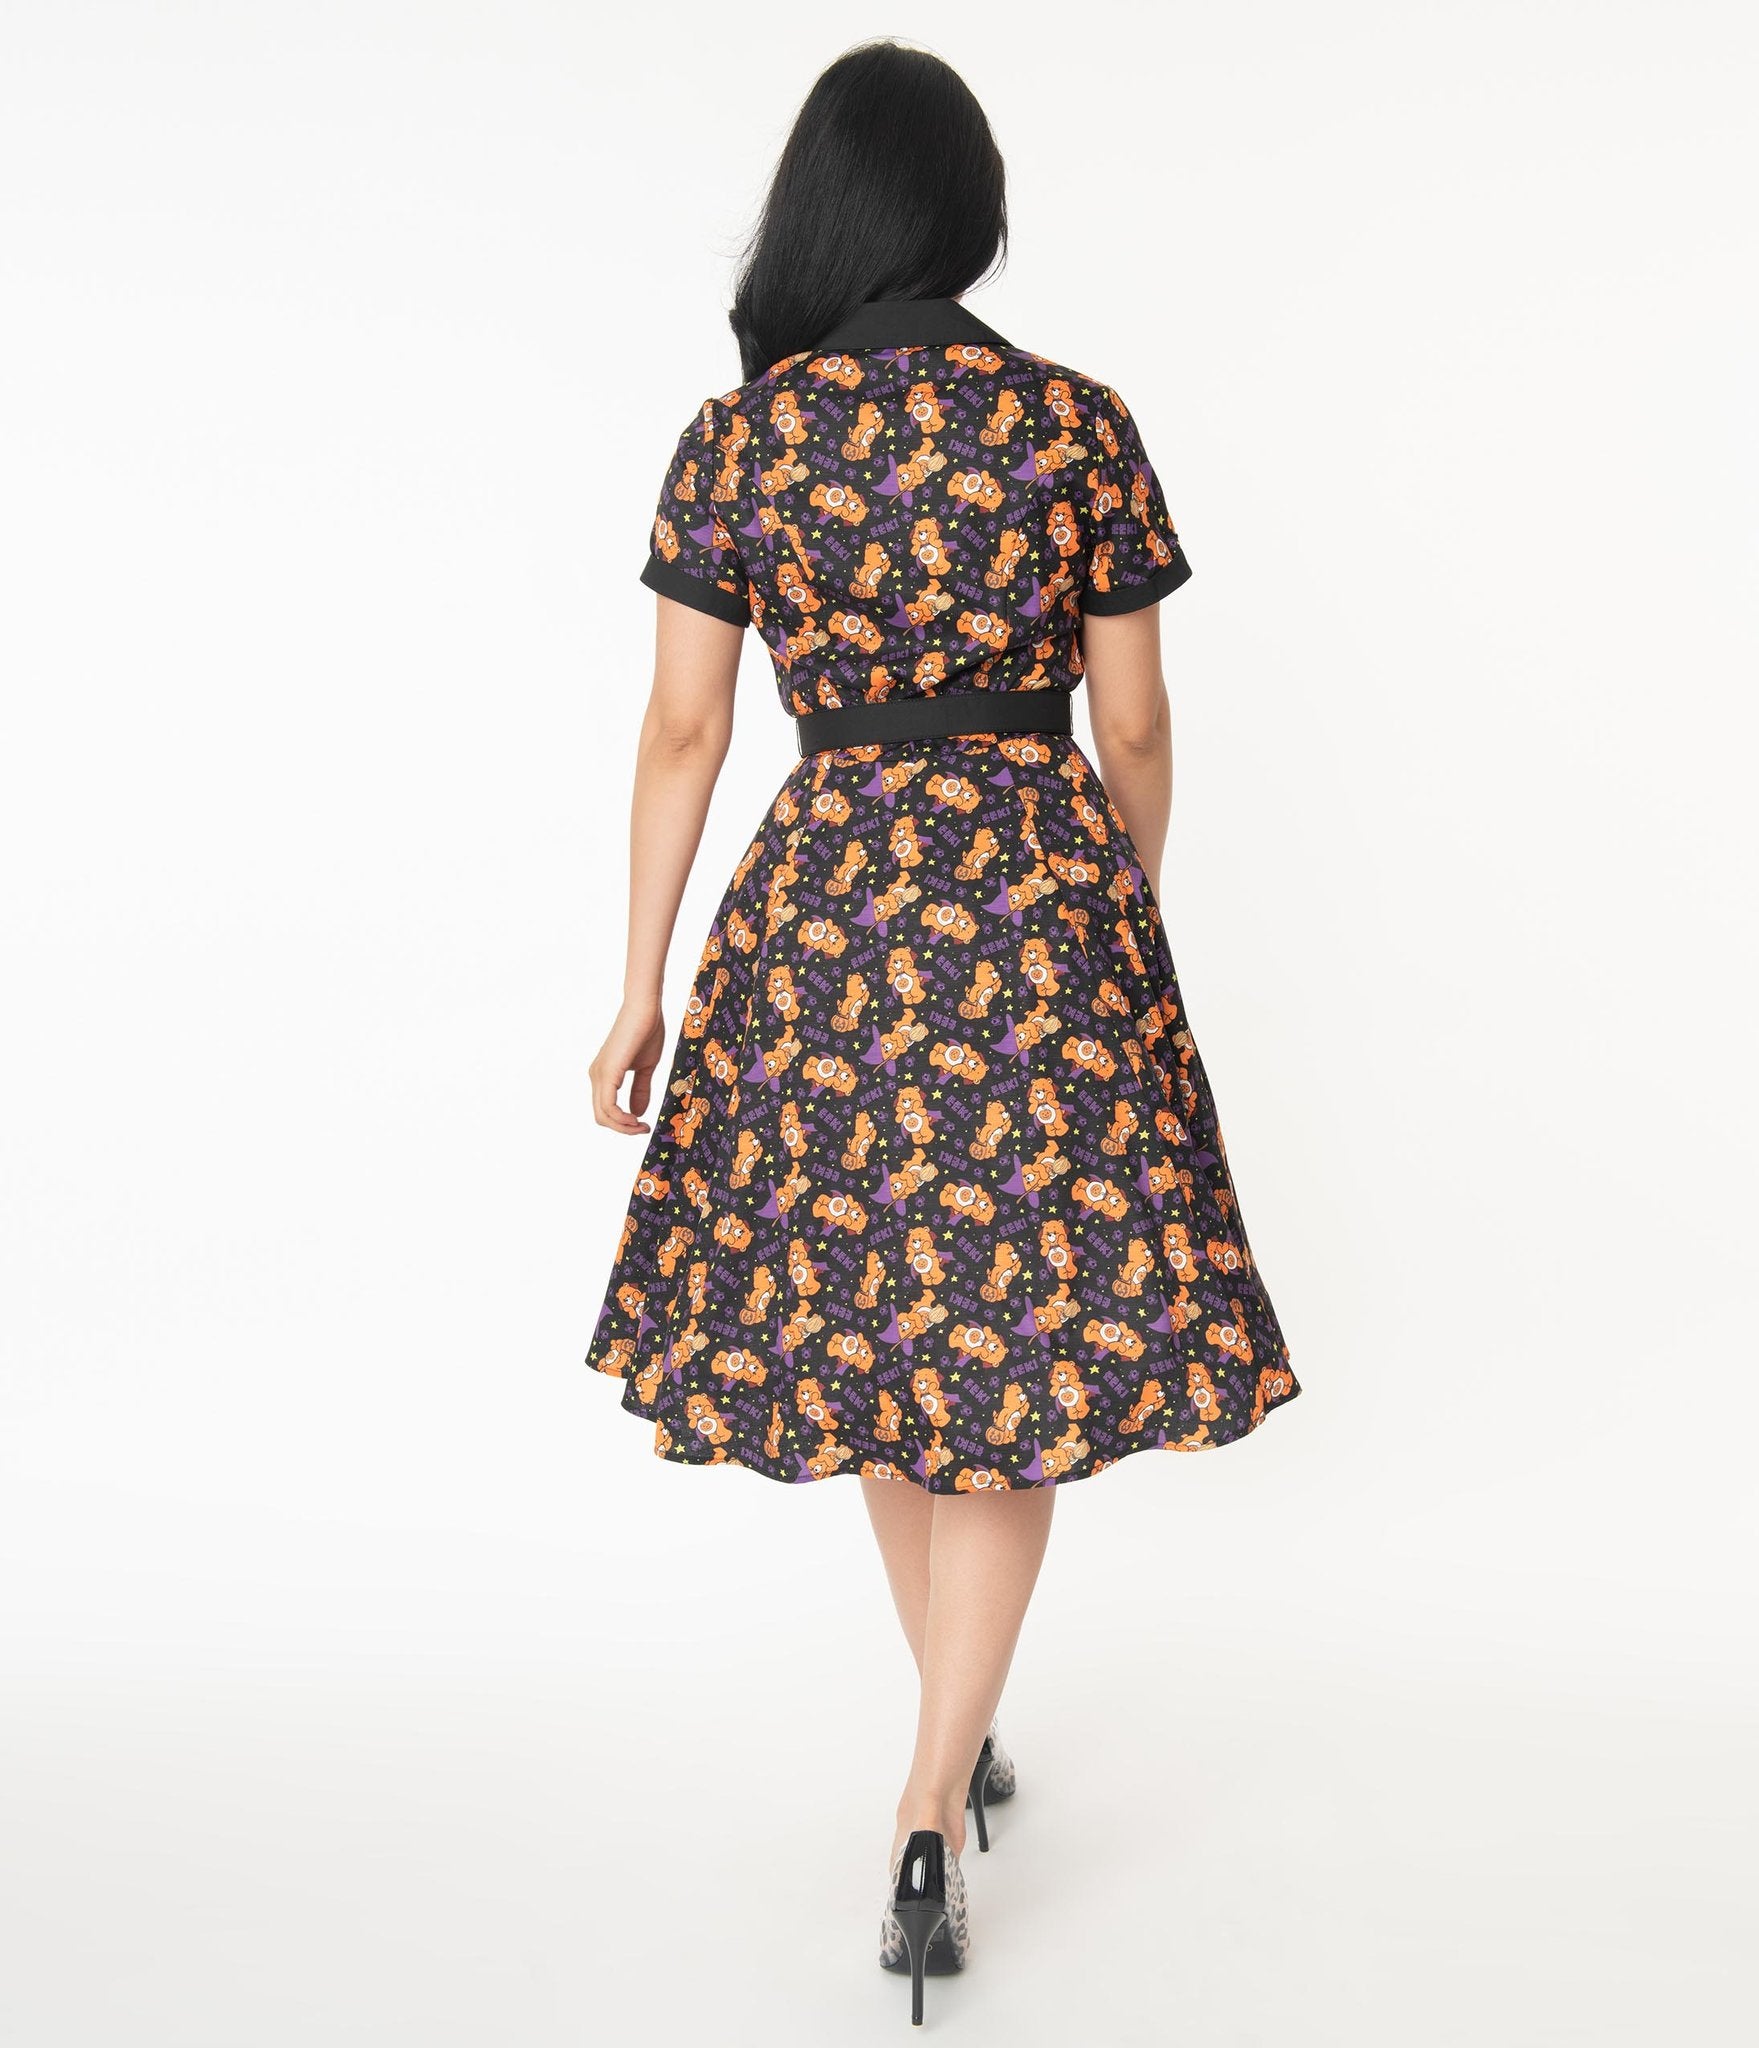 This is a Care Bears Halloween Creepy black swing dress from Unique Vintage and it has an orange bear with a pumpkin and the model has black hair pulled to the side and is wearing leopard print shoes. 